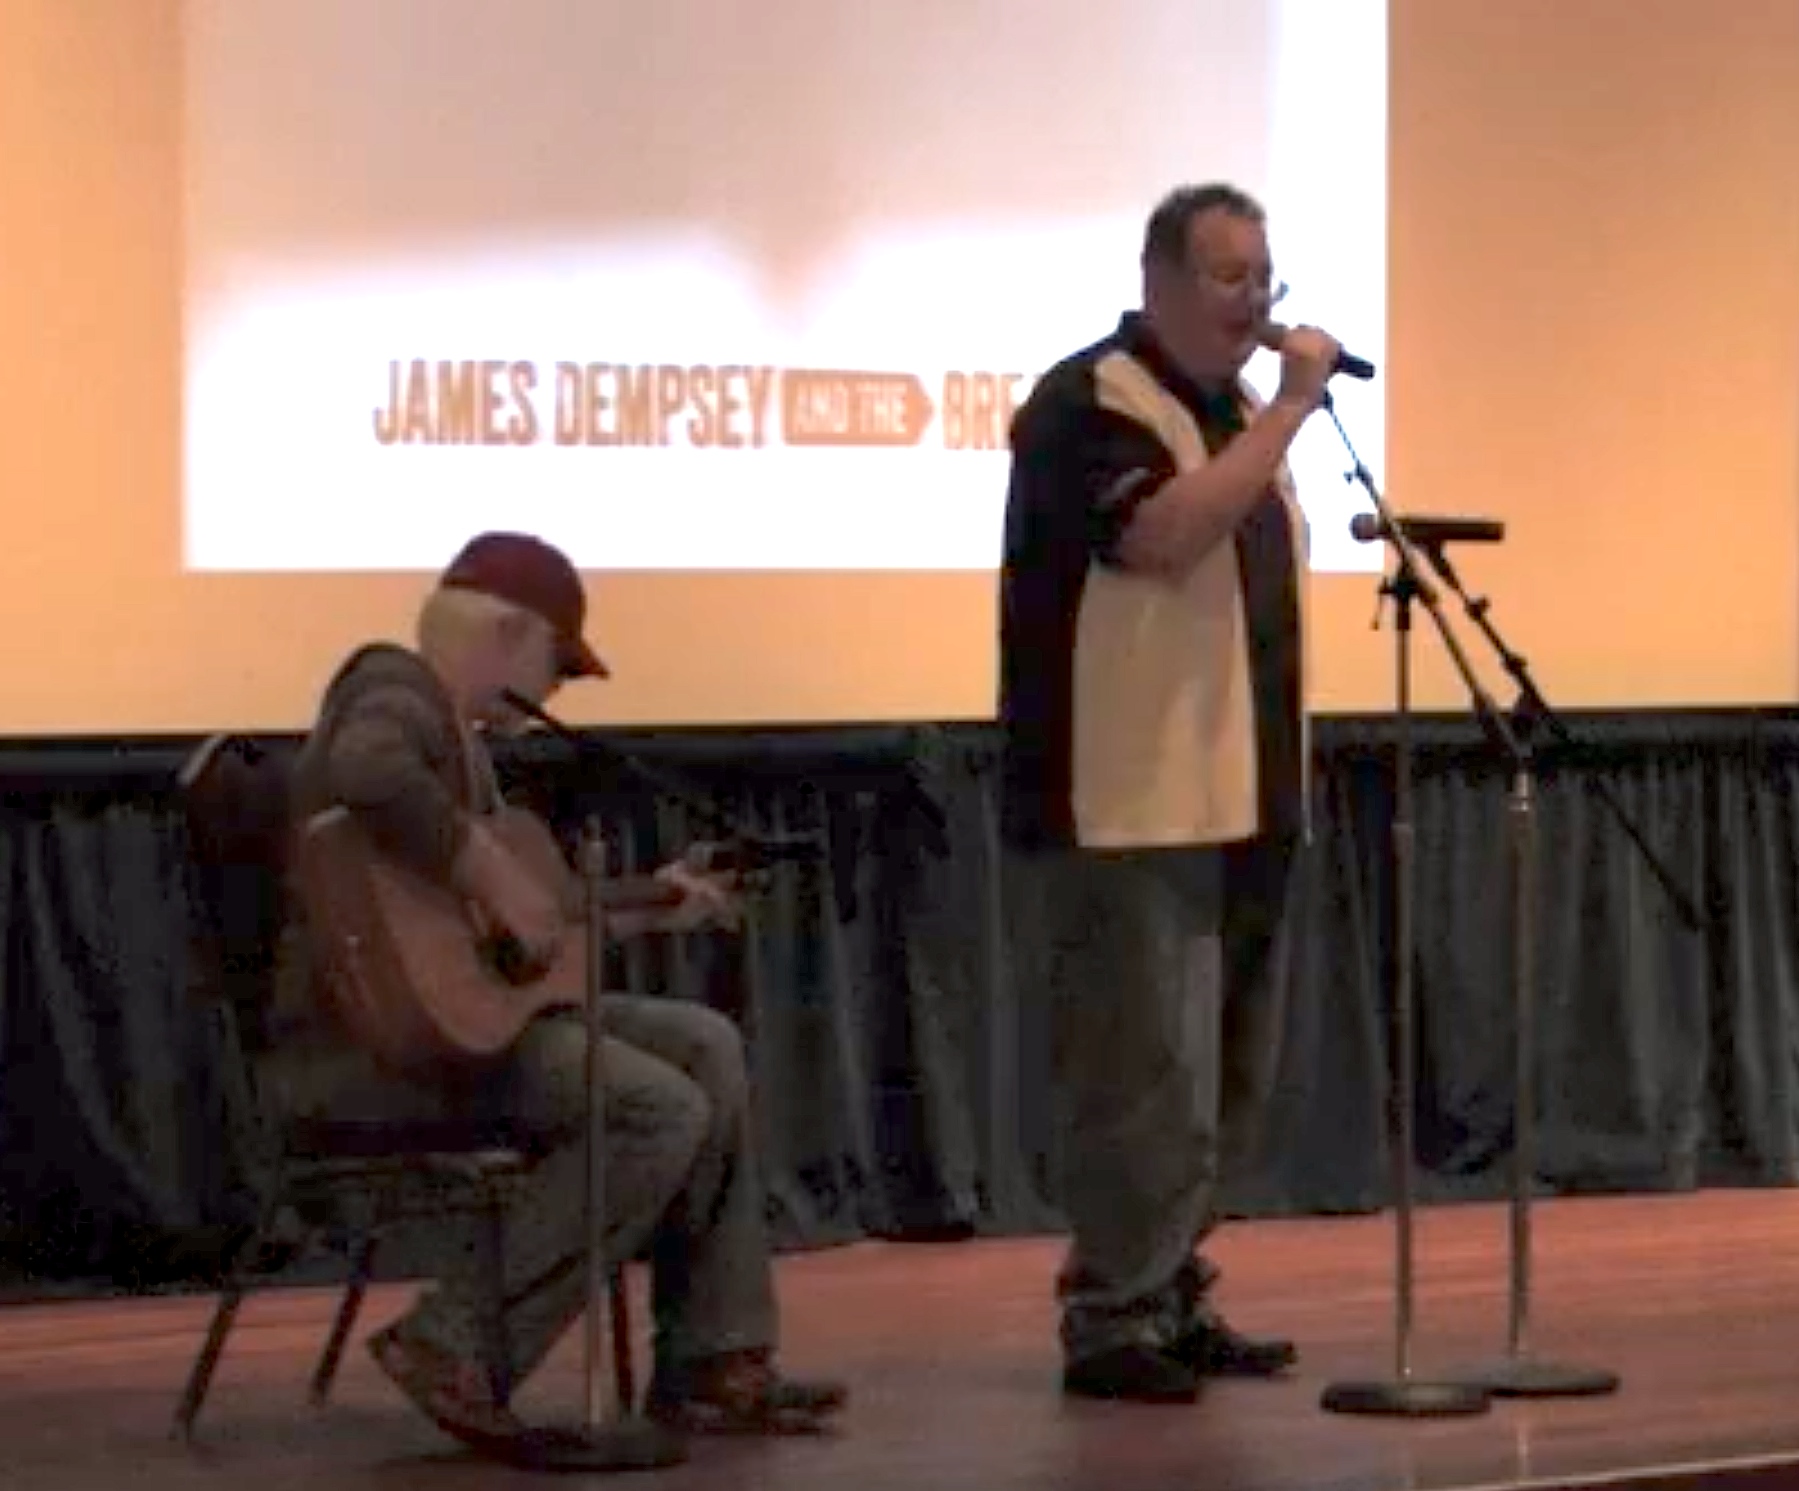 James Dempsey singing at a microphone with Darren Minifie sitting playing acoustic guitar.